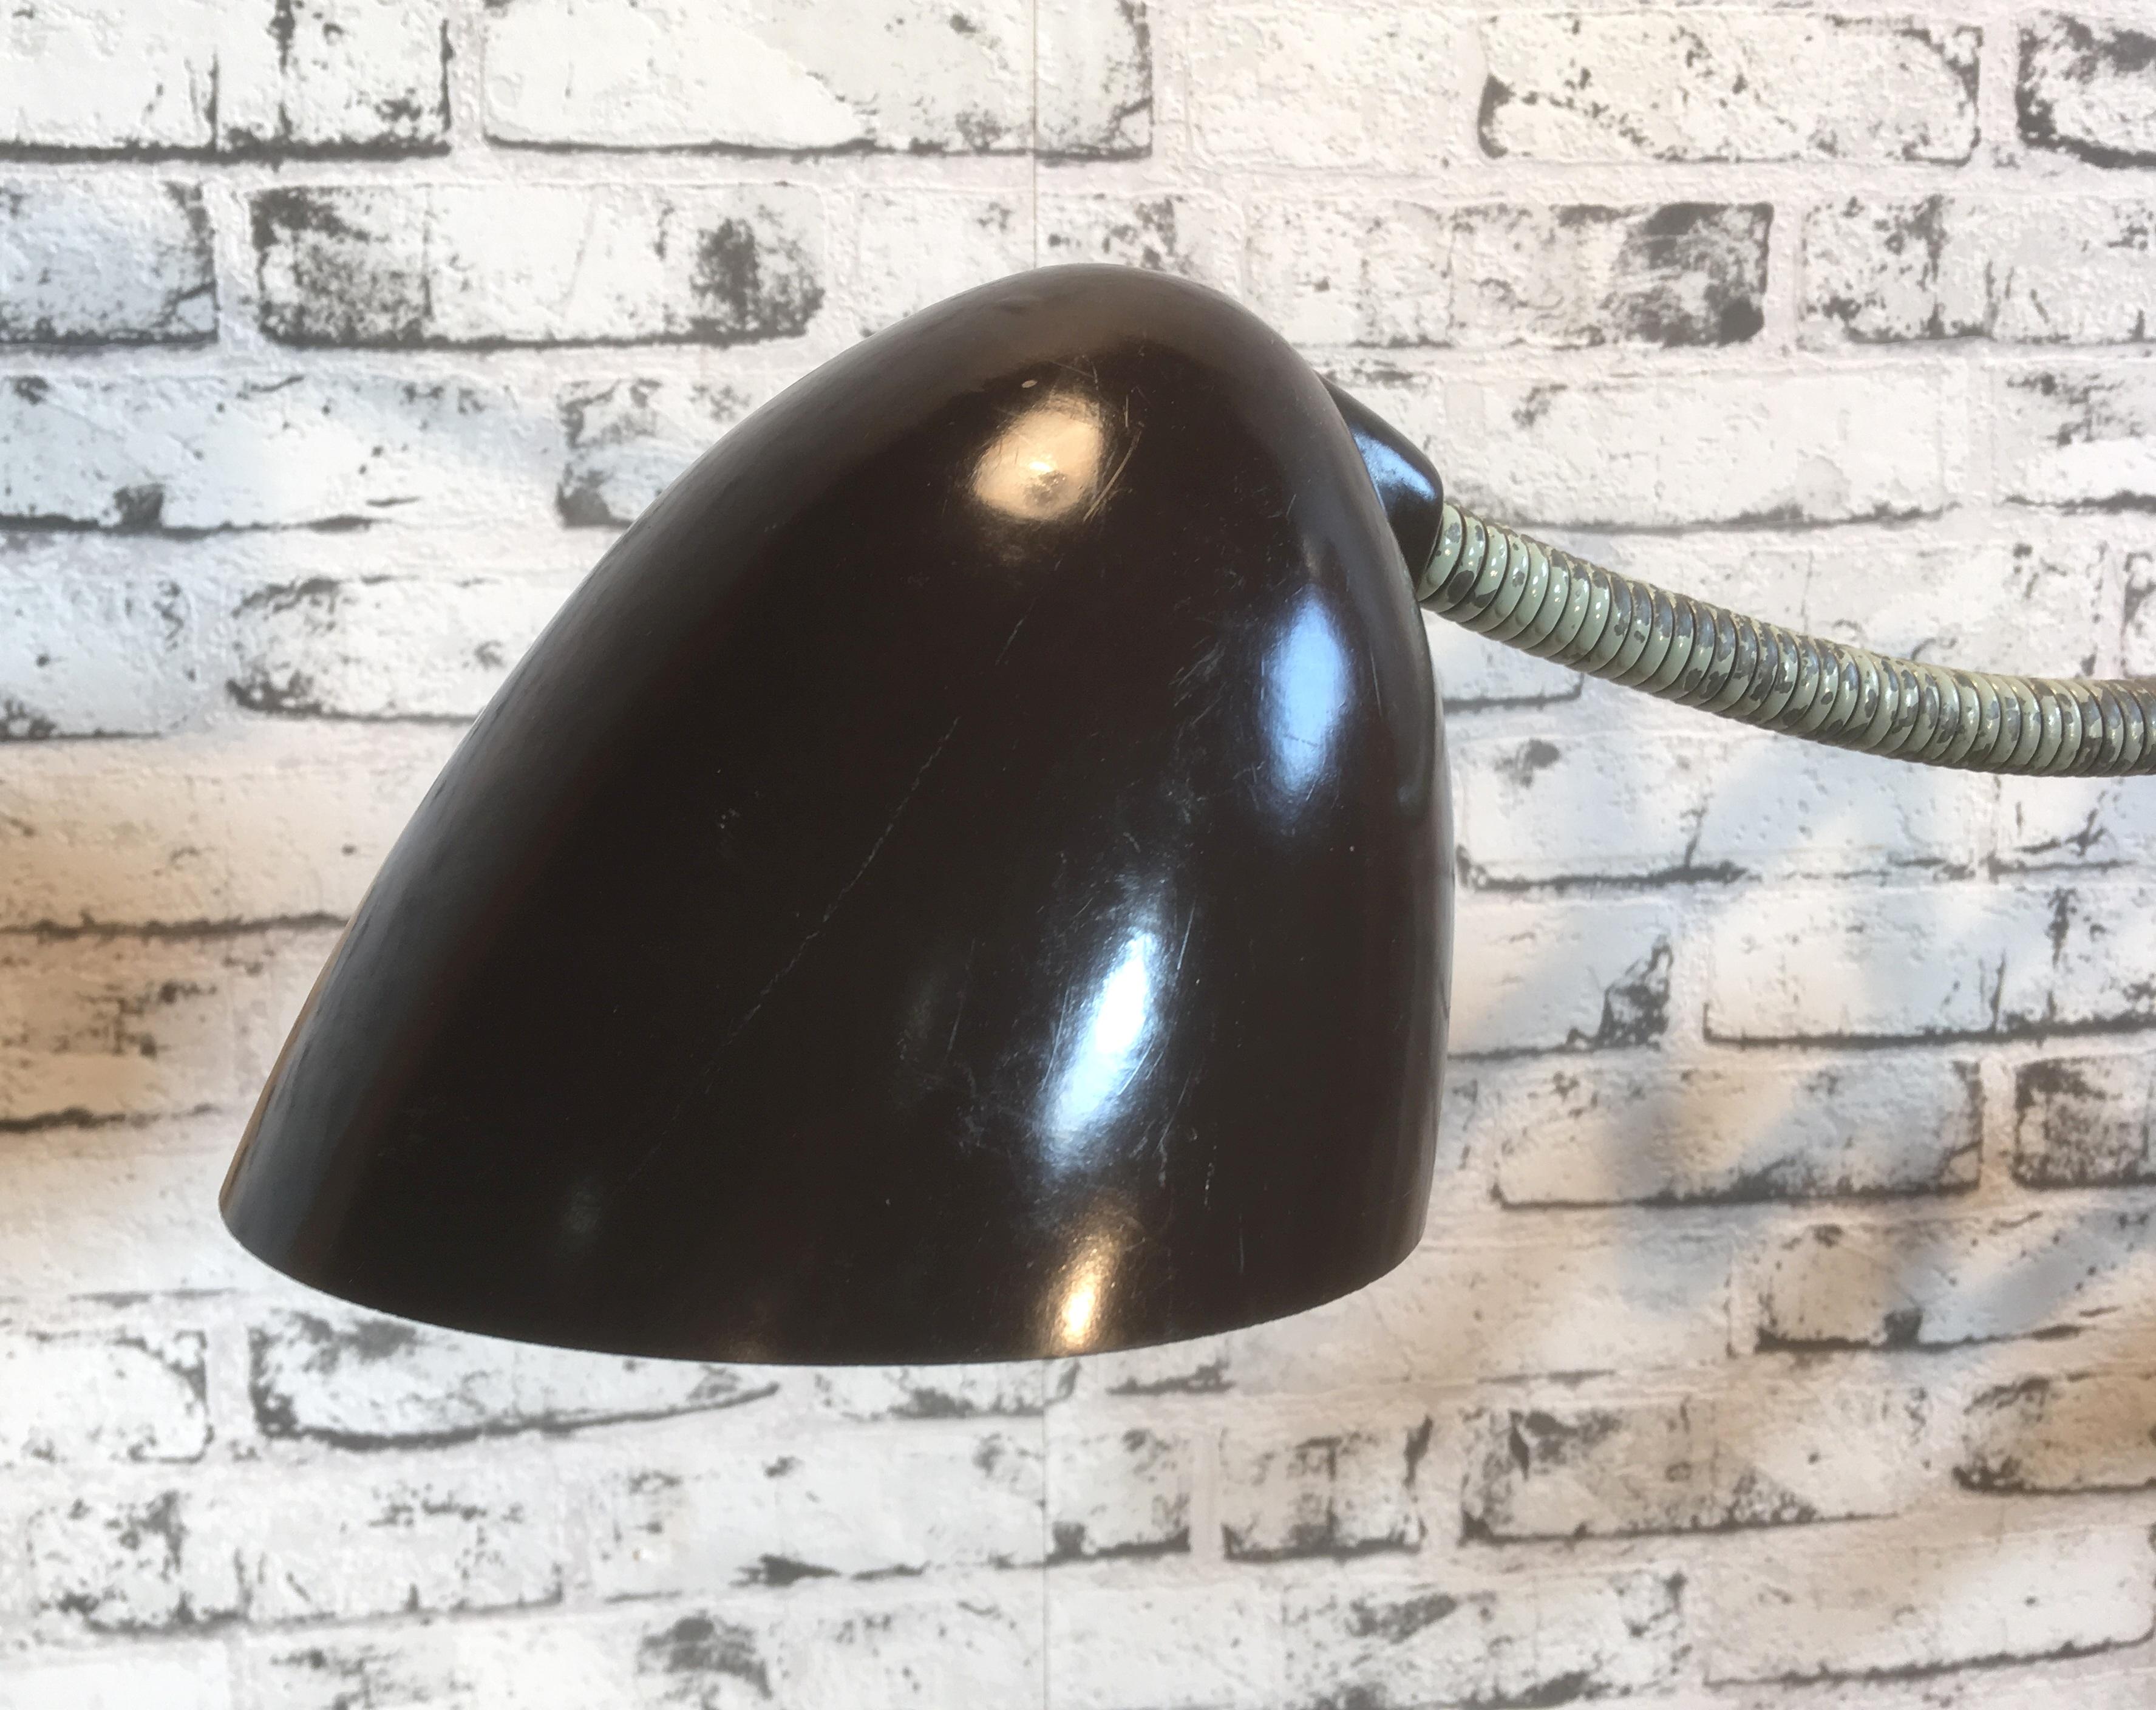 This vintage Industrial scissor lamp was produced by Elektroinstala in former Czechoslovakia in the 1960s. Lamp has brown Bakelite shade. Green iron scissor arm is extendable and can be turned sideways. Fully functional. Very nice vintage